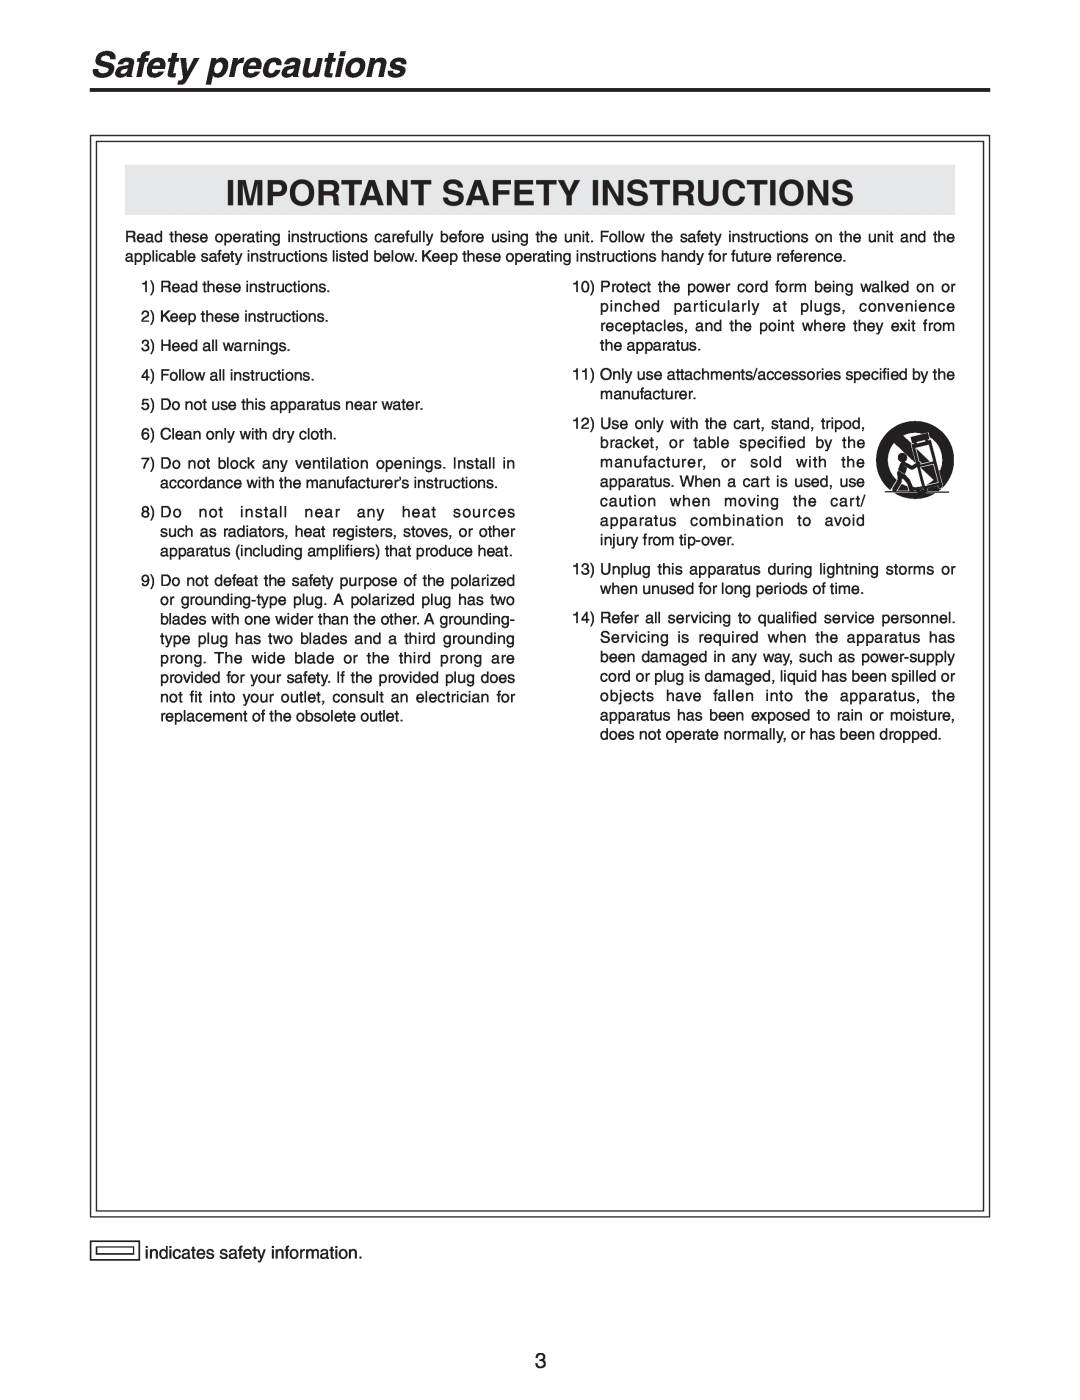 Panasonic AW-PH650N manual Safety precautions, Important Safety Instructions, indicates safety information 